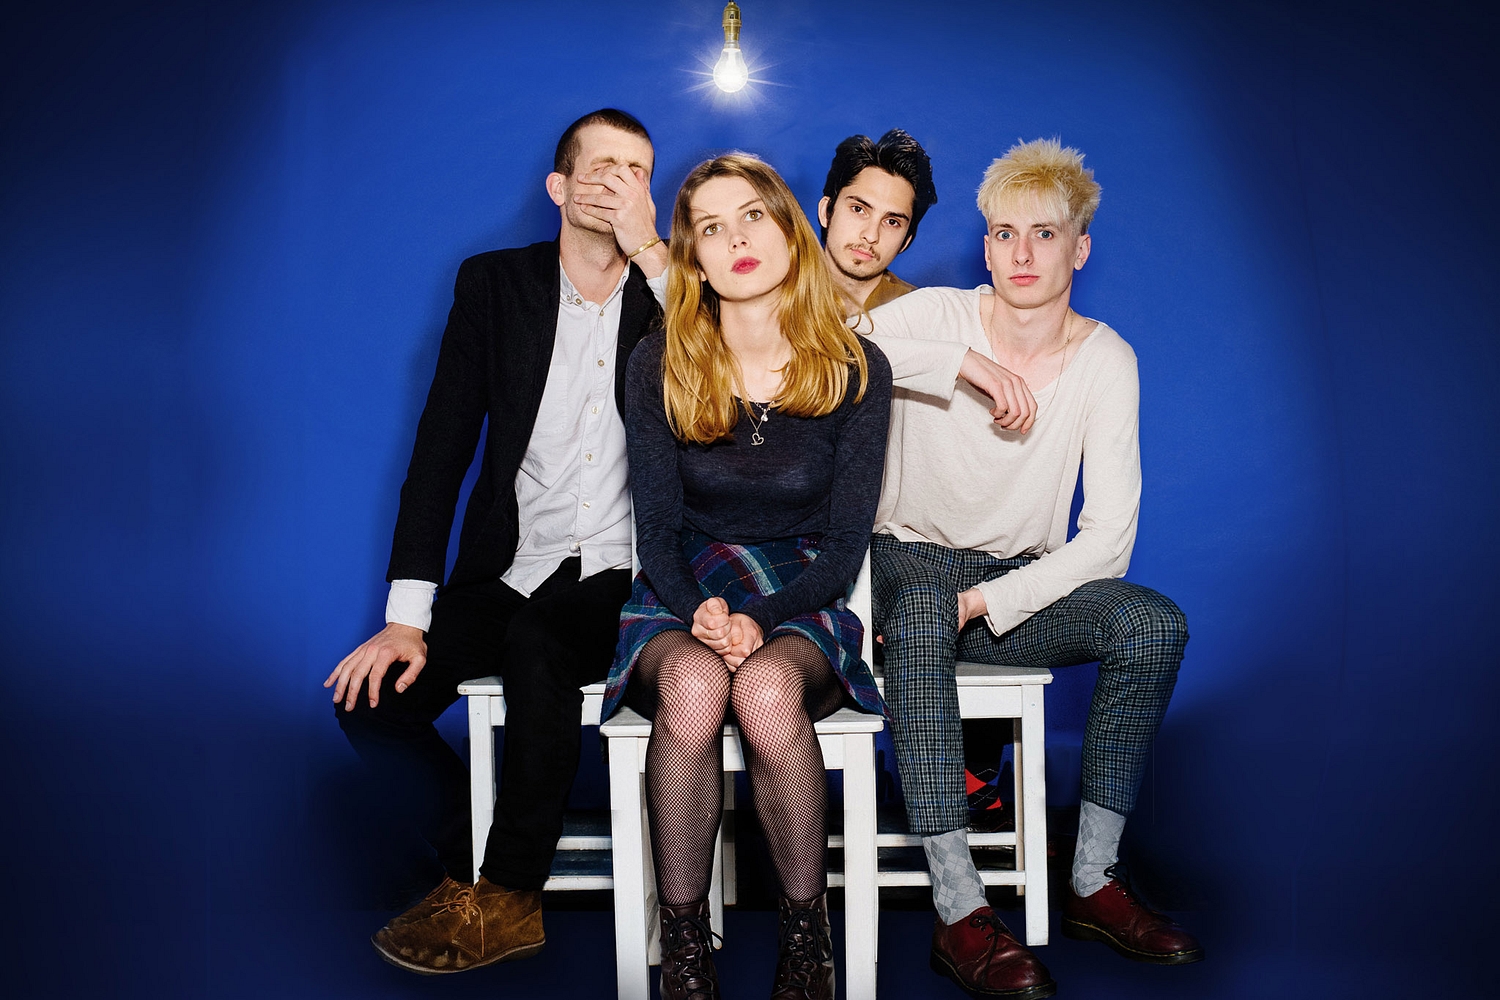 Wolf Alice: Next in line to the throne